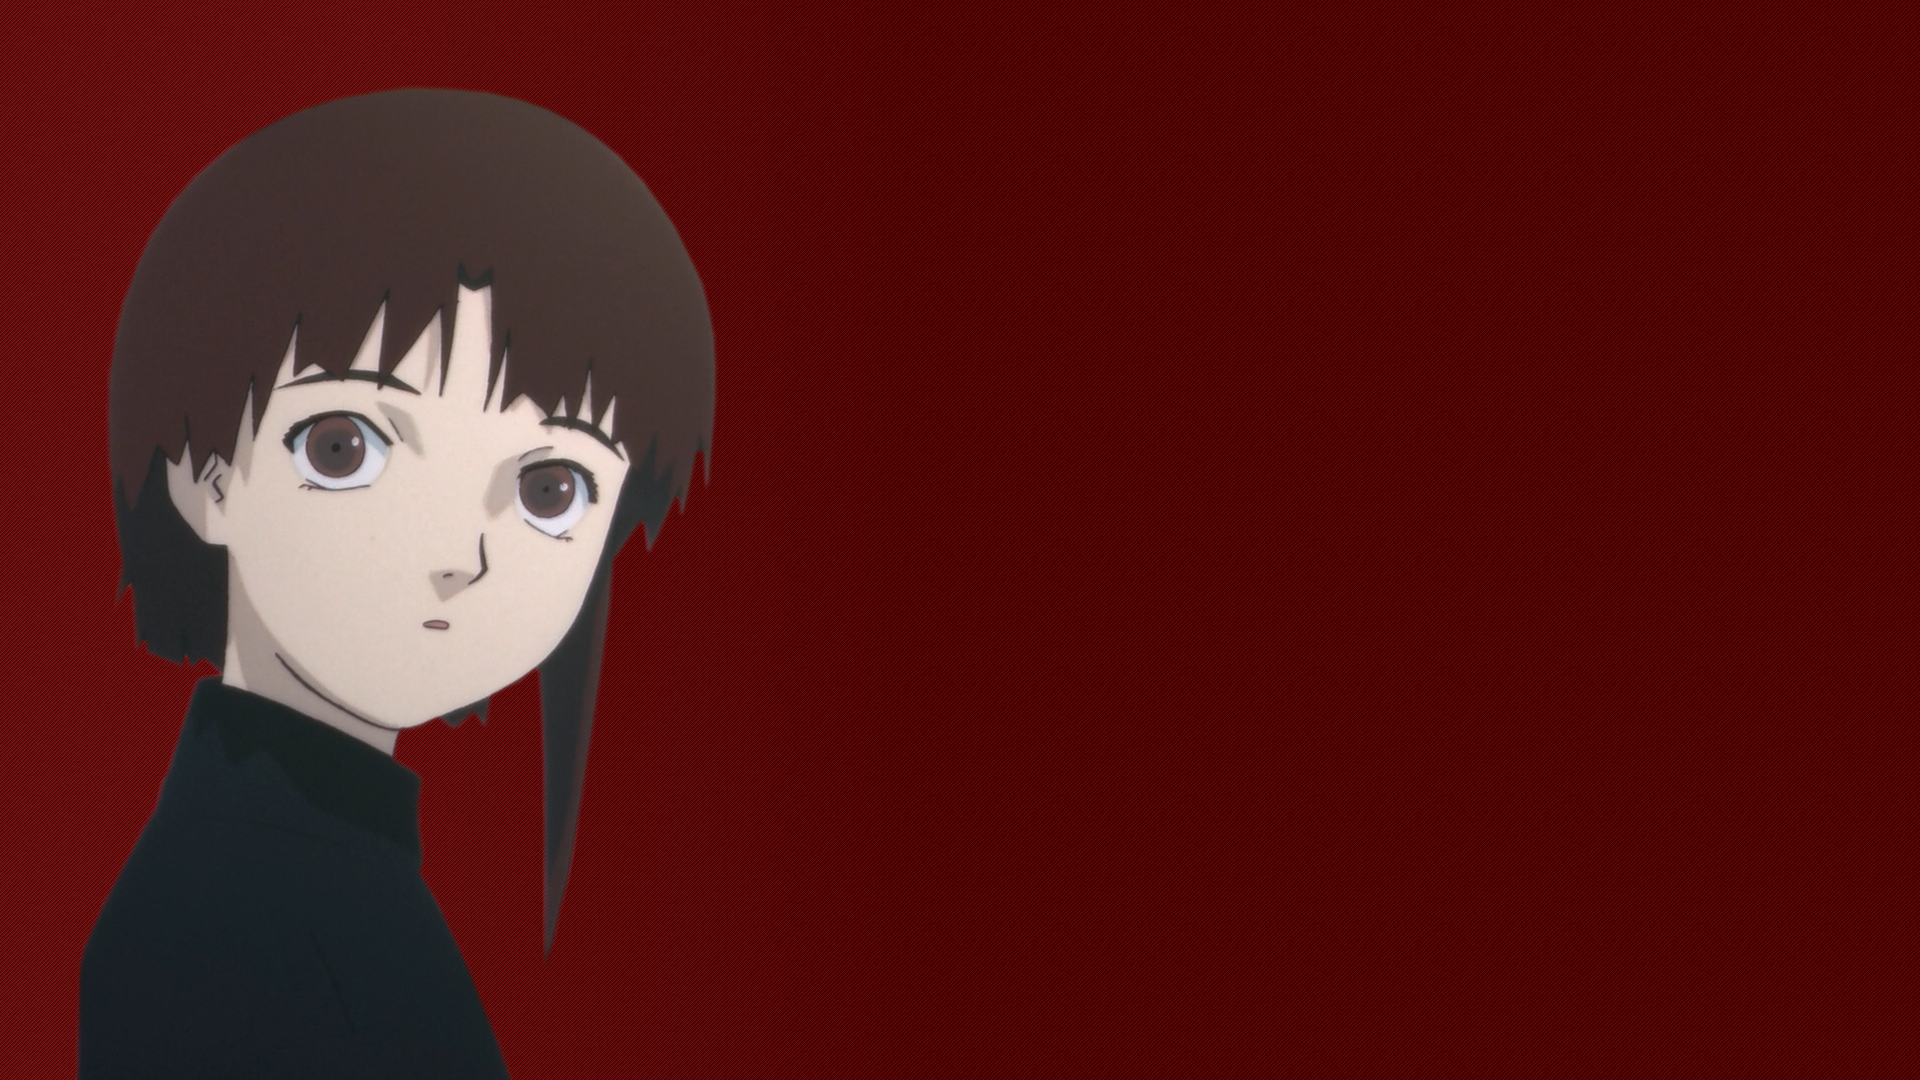 Anime 1920x1080 anime girls anime brown eyes brunette simple background red background Lain Iwakura Serial Experiments Lain